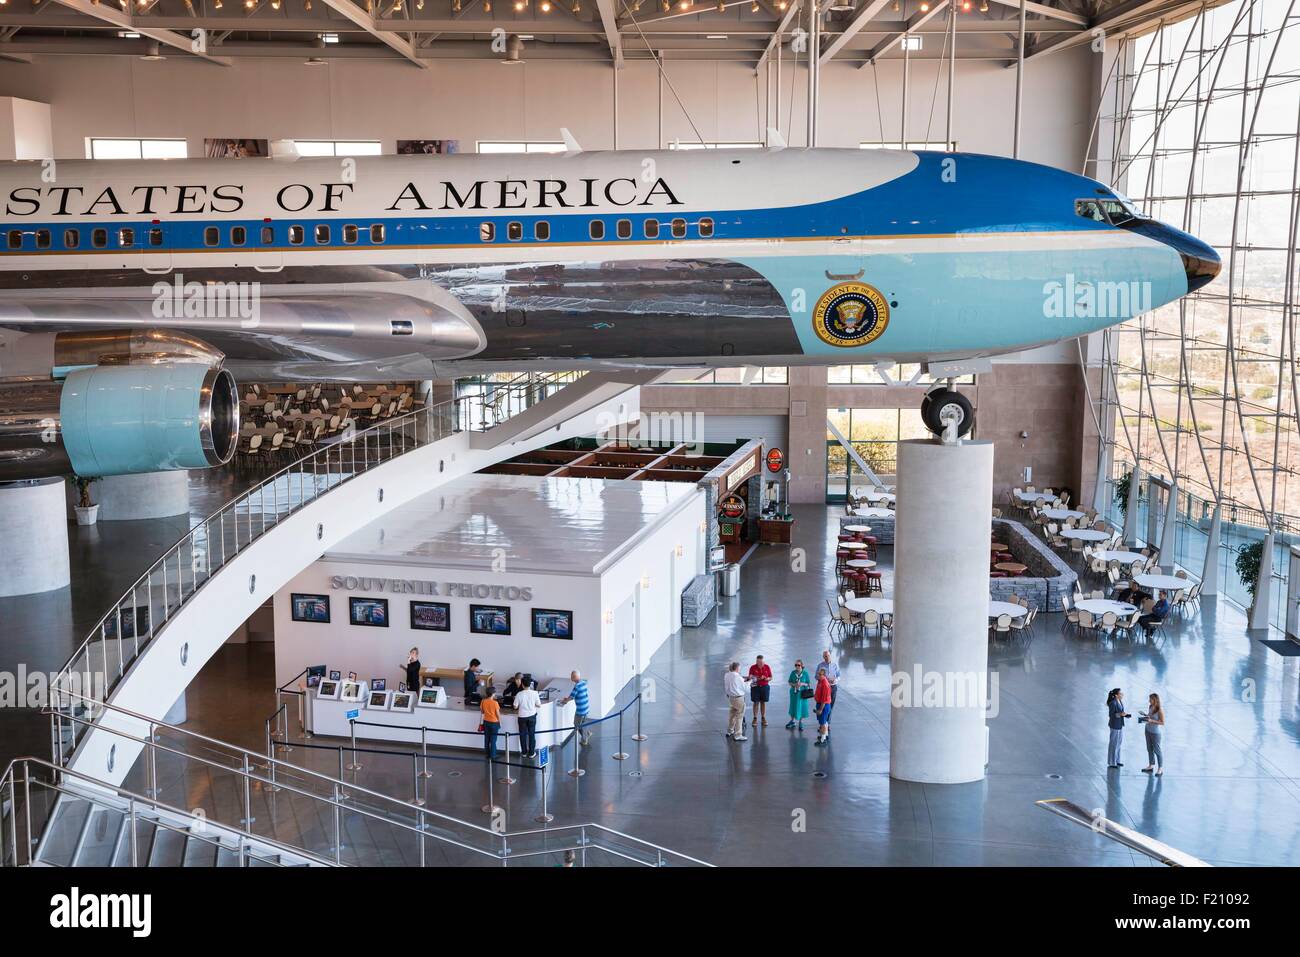 United States, California, Simi Valley, The Ronald Reagan presidential library and museum, exhibit featuring the Boeing 707 Airforce One used by american presidents from 1973 to 2001 Stock Photo